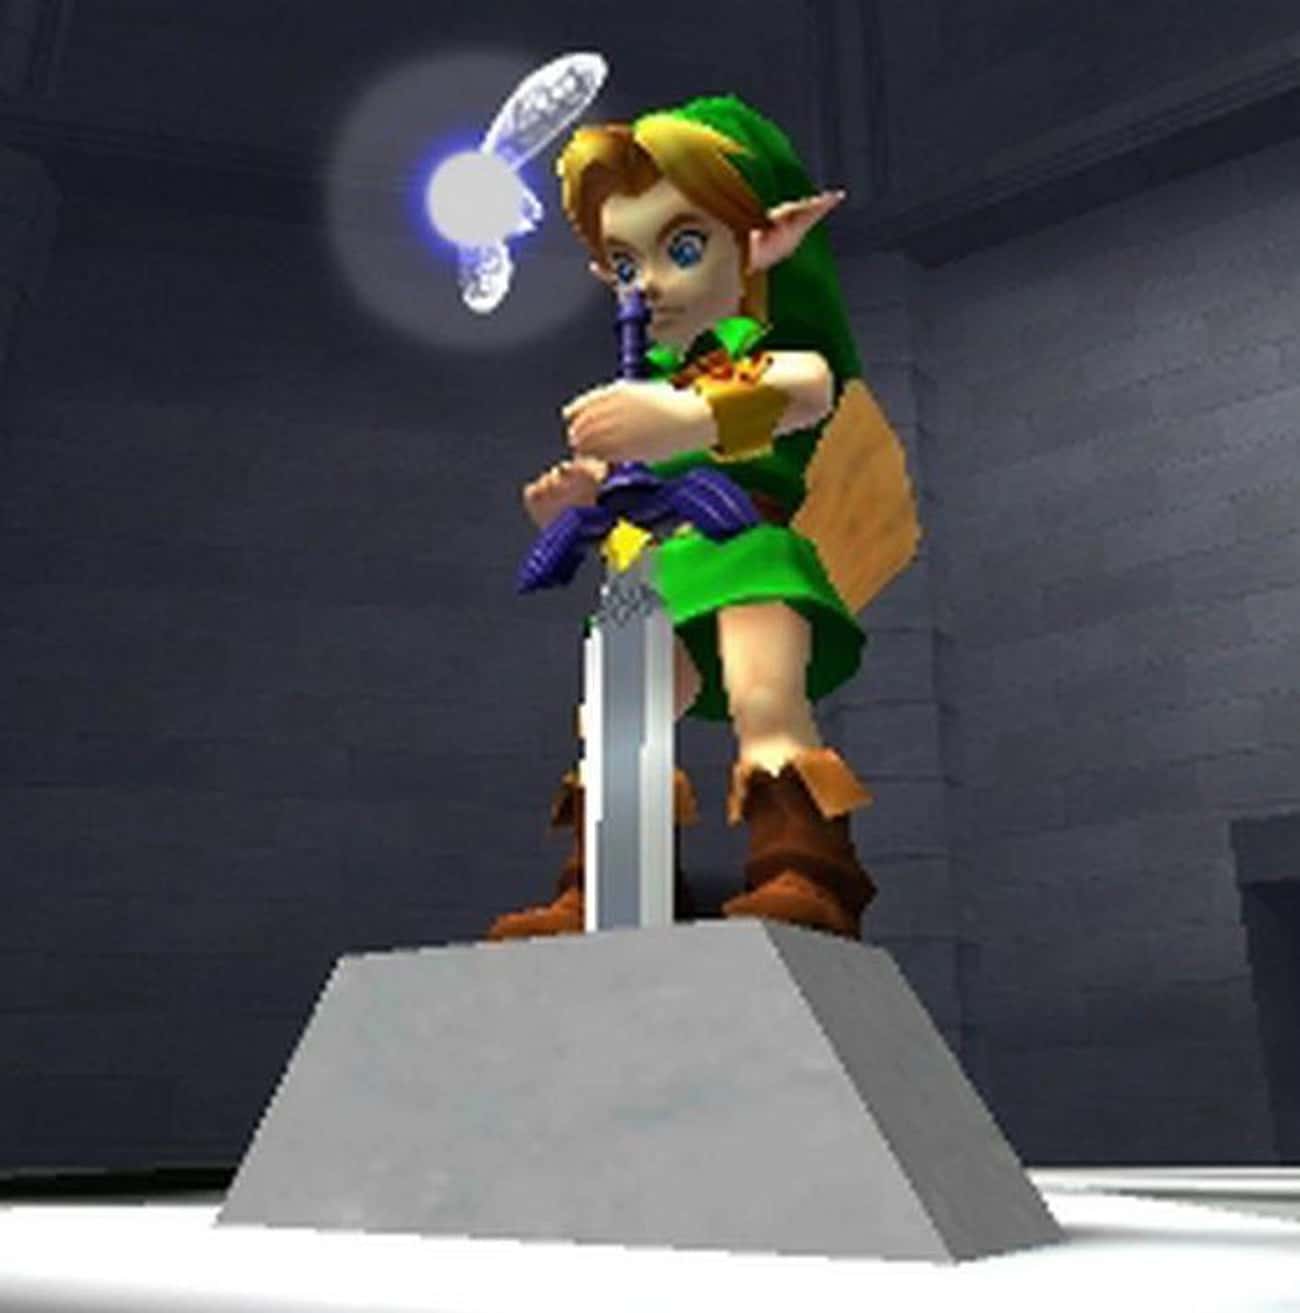 Navi Dies At The End Of Ocarina Of Time